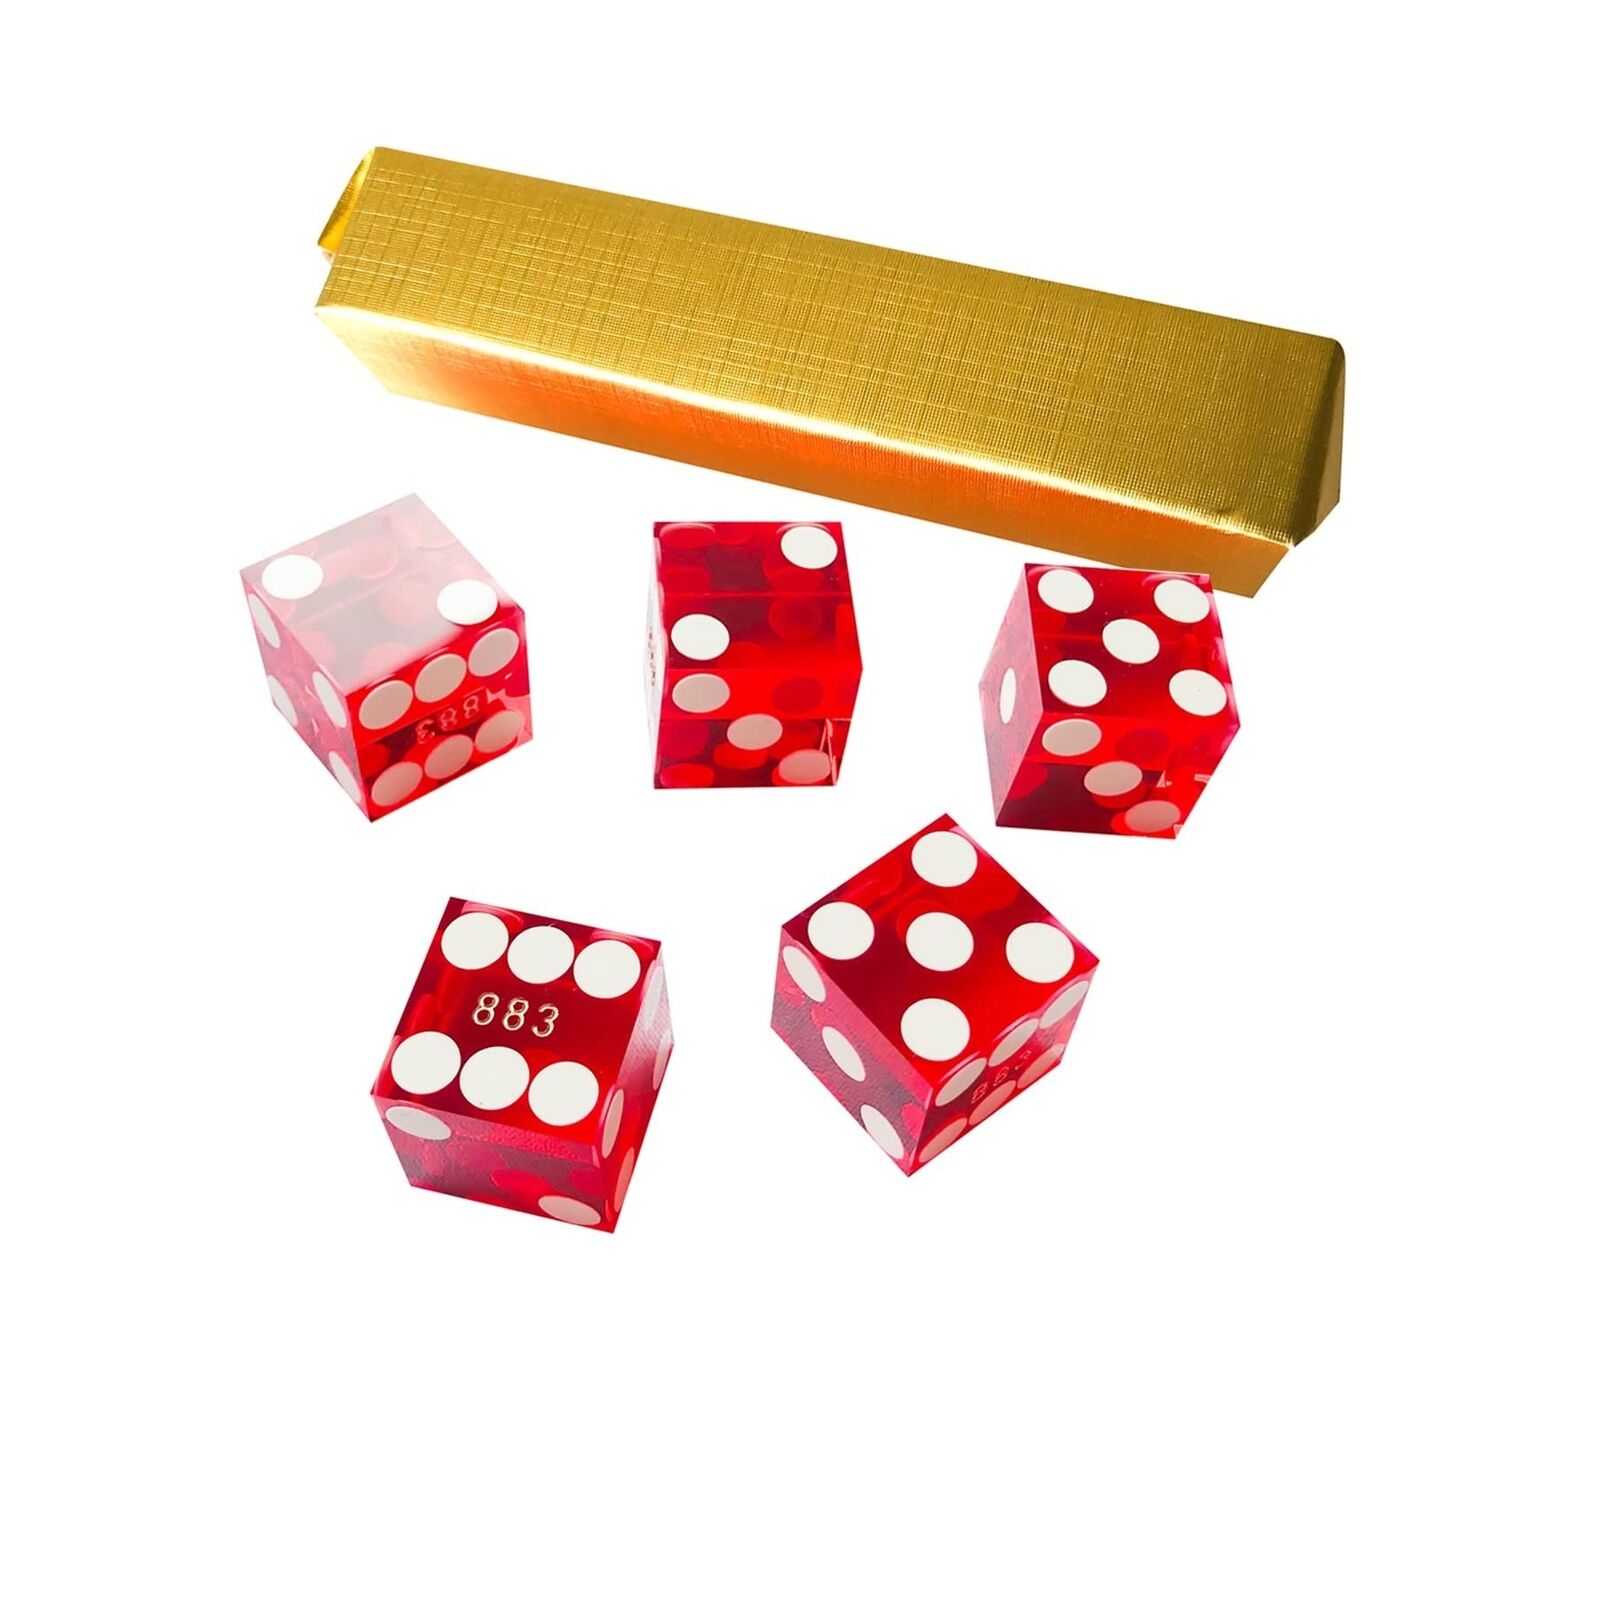 Yuanhe Set of 5 Grade AAA Precision 19mm Serialized Casino Craps Dice with Ra...